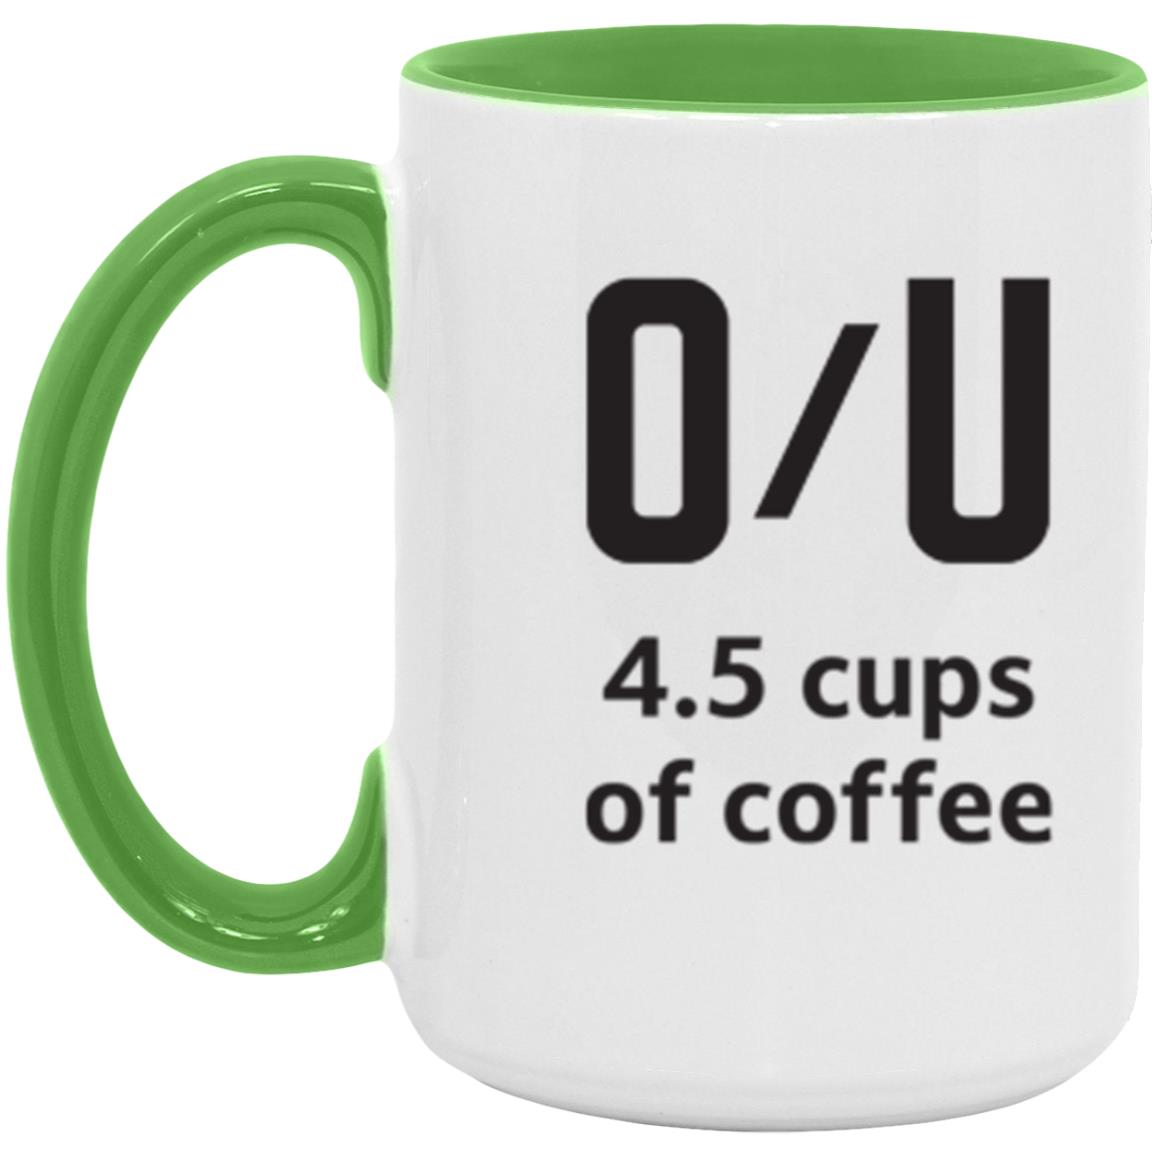 Over / Under 4.5 cups of coffee - 15oz. Accent Mug